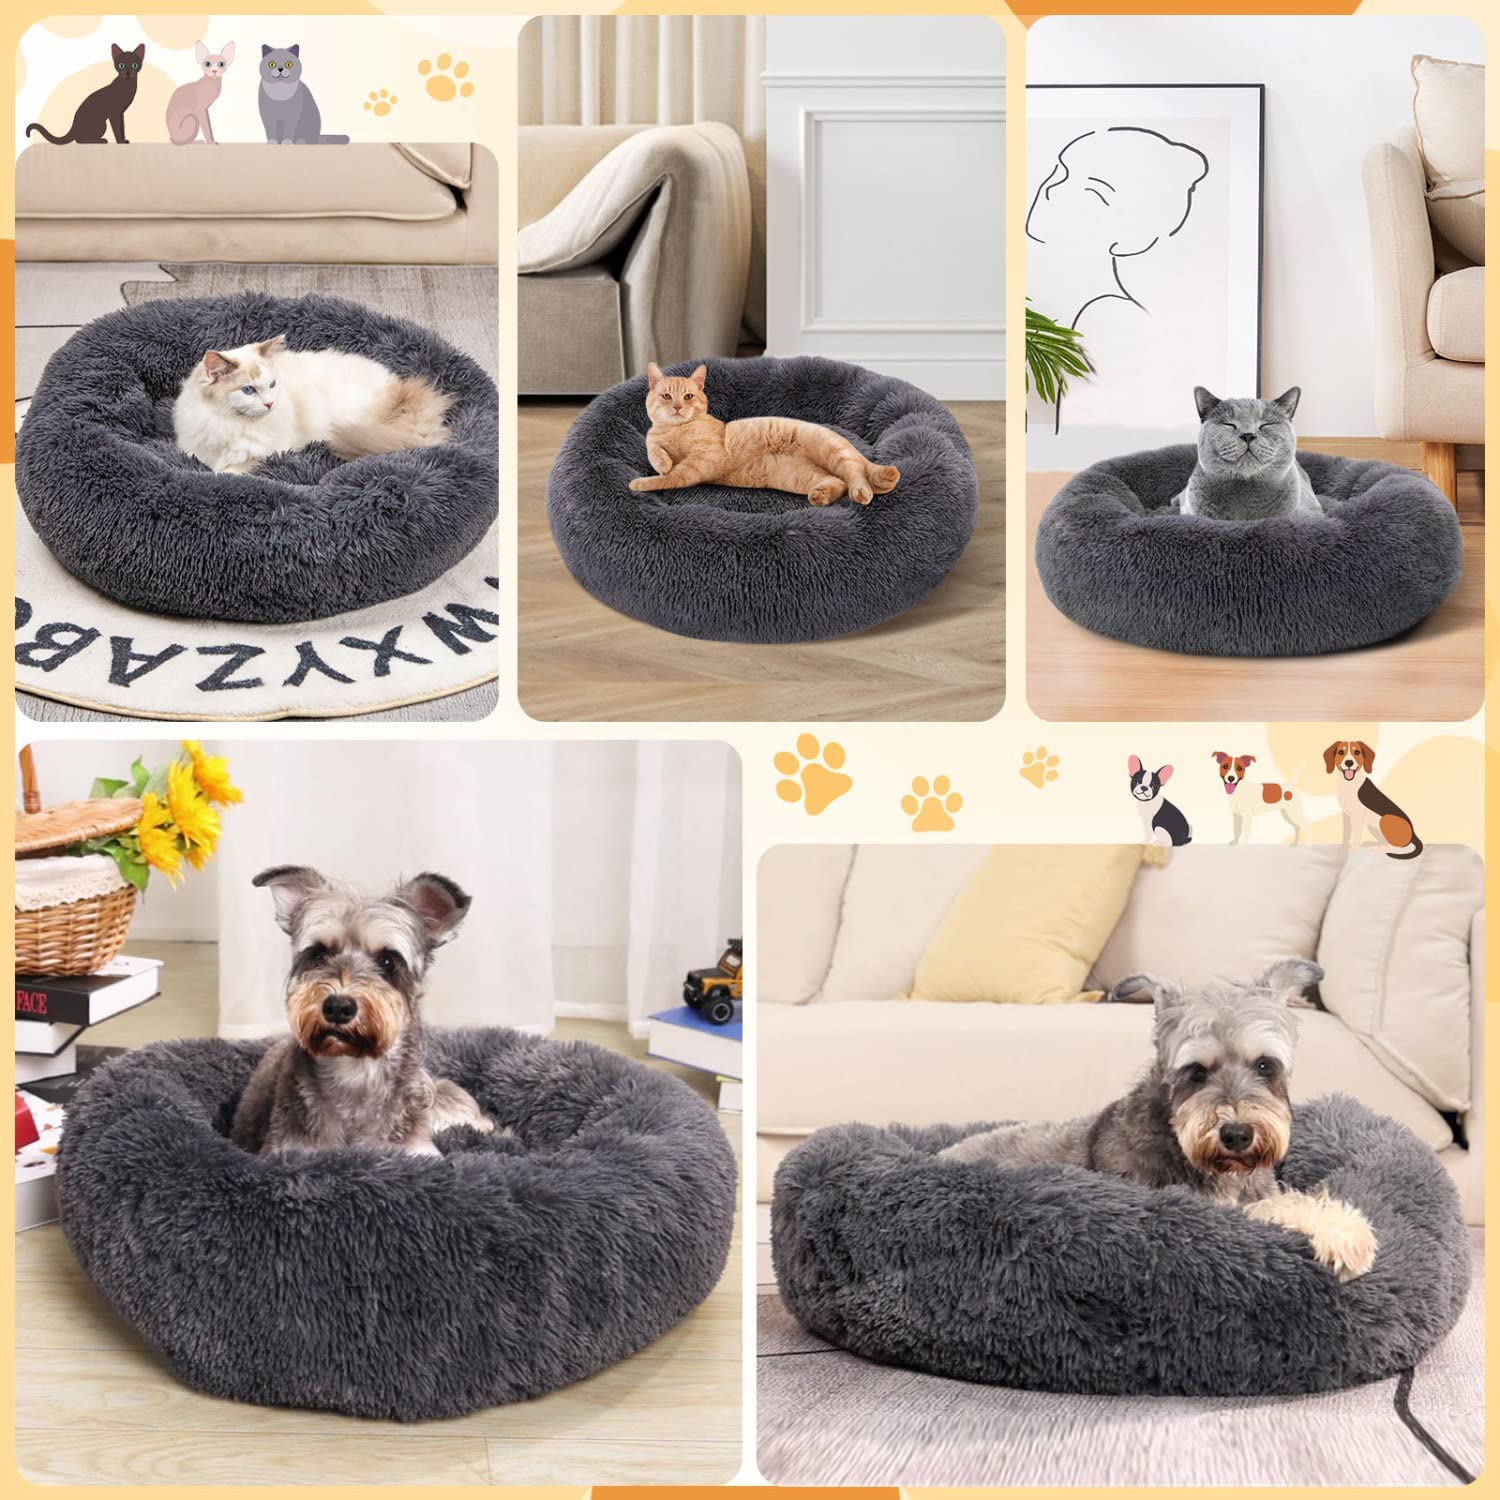 28 Inch Round Plush Pet Bed for Dogs & Cats, Fluffy Soft Warm Calming Dog Bed Cozy Faux Fur Dog Bed Sleeping Kennel Nest, Dark Grey - image 4 of 9